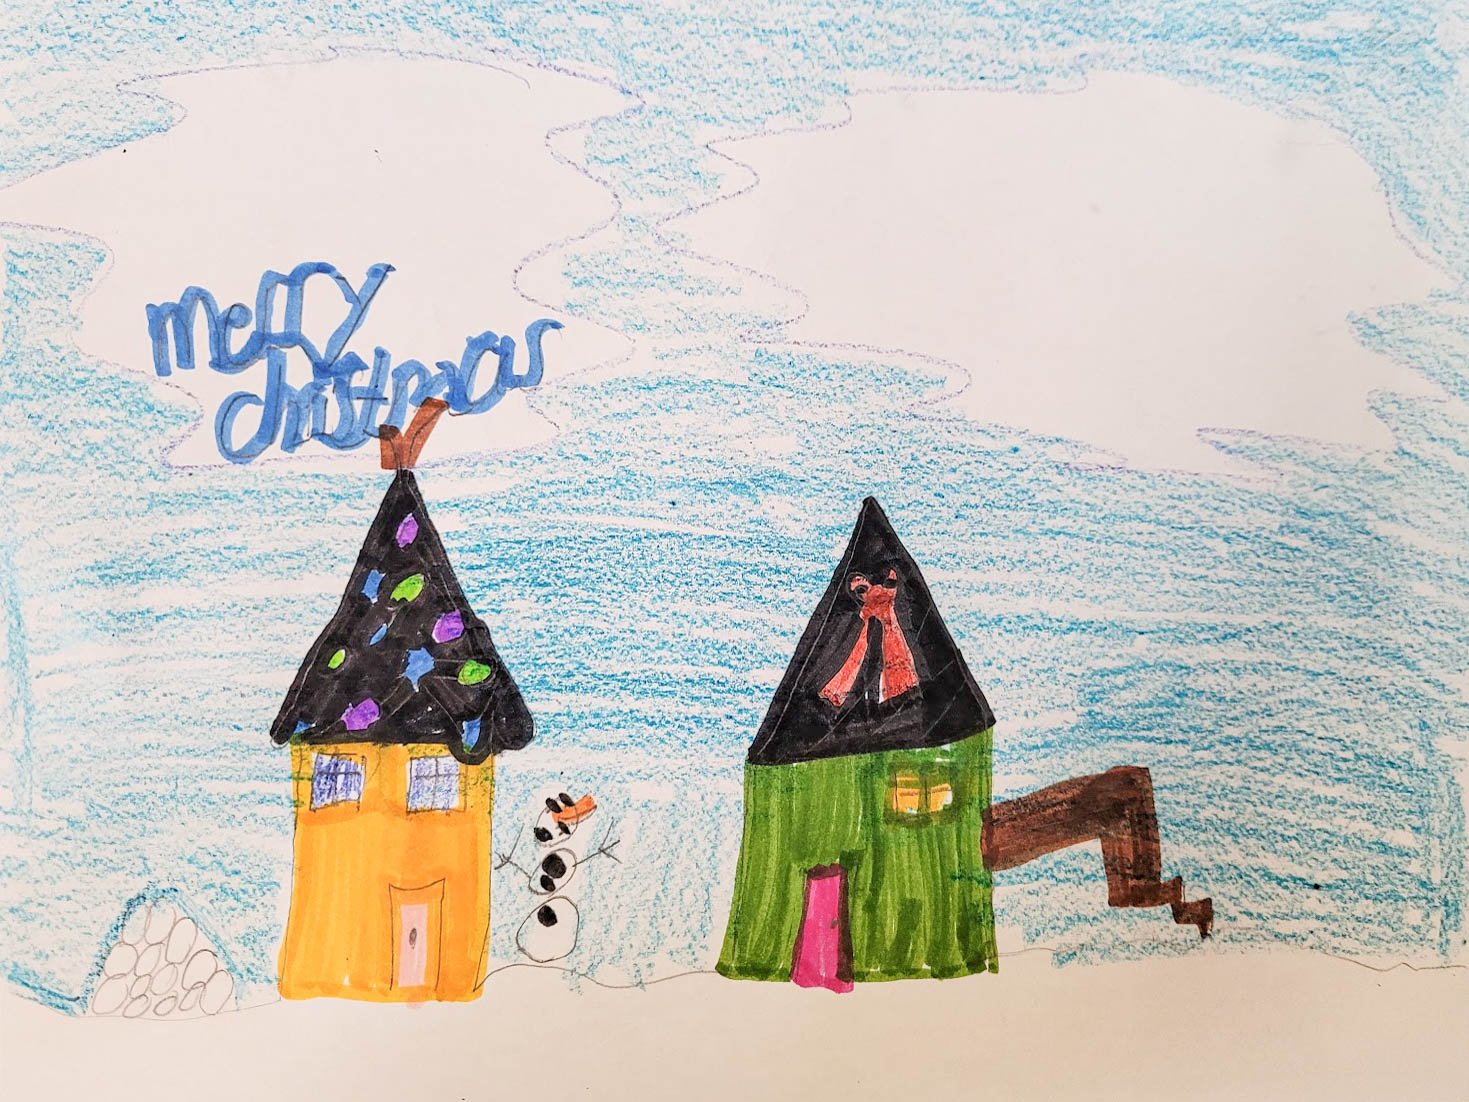 Artwork by grace, Age 8 from Chipman